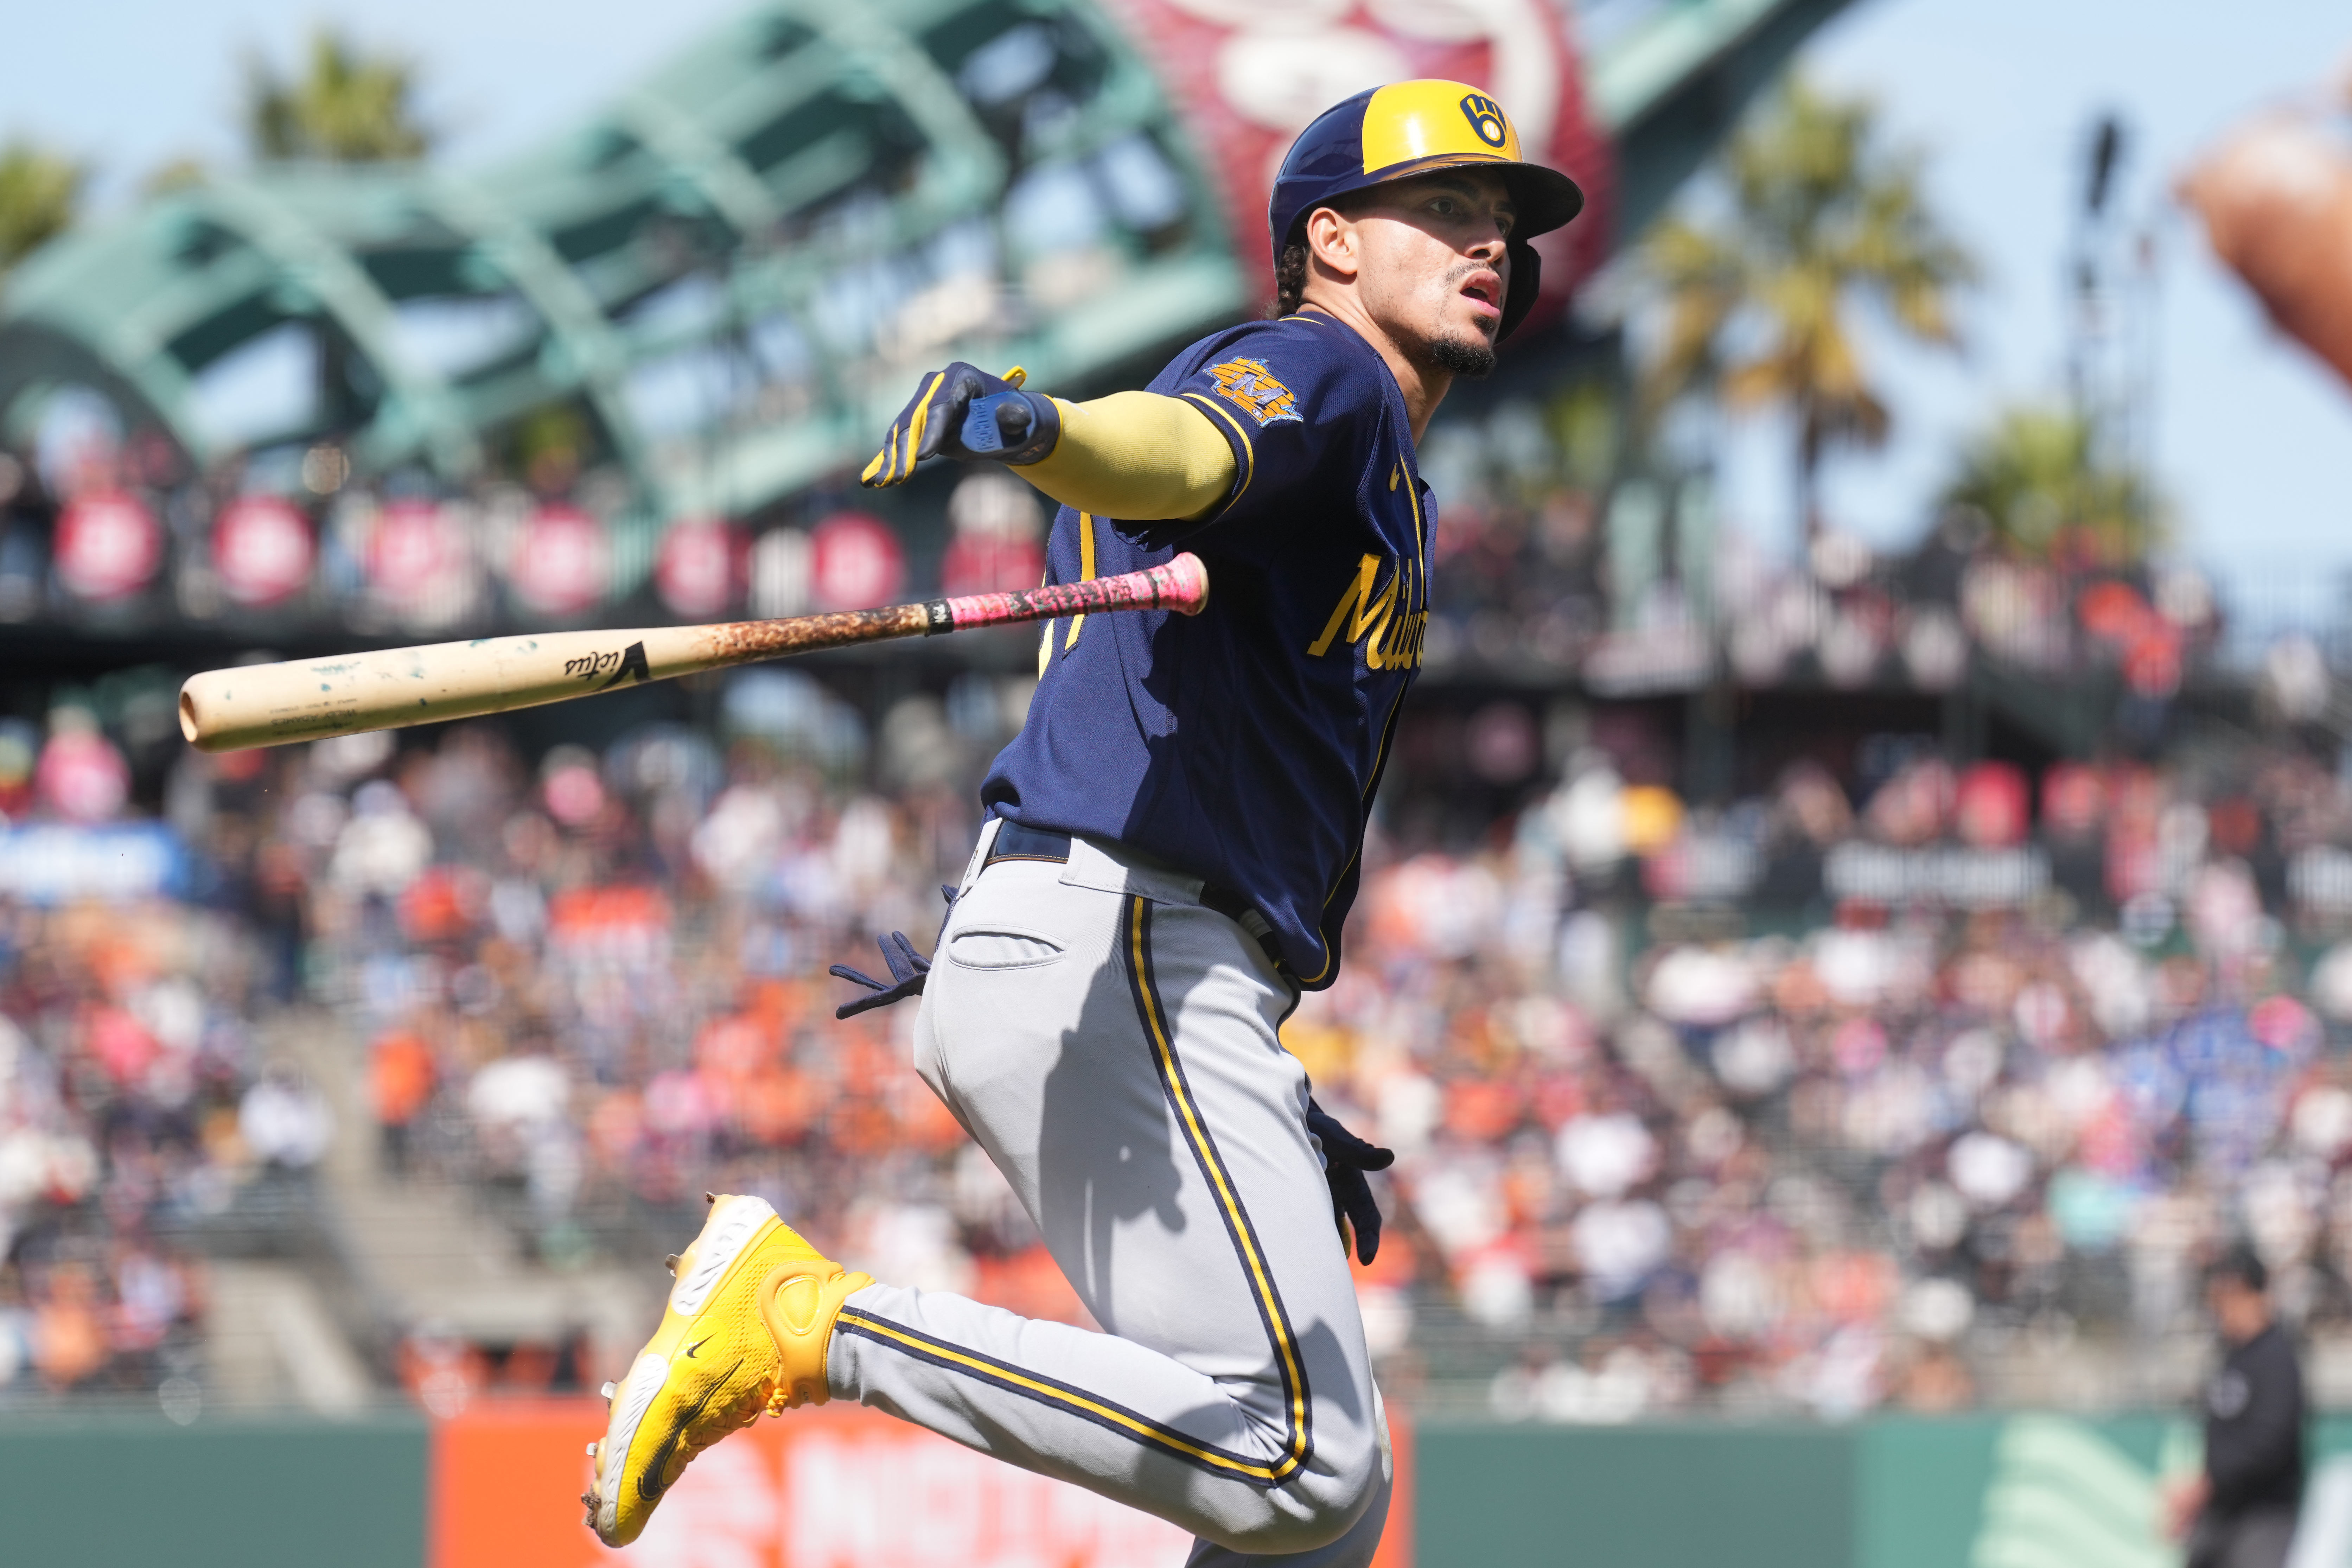 Brewers lose to the #Giants 15-1. Plus an update on Willy Adames